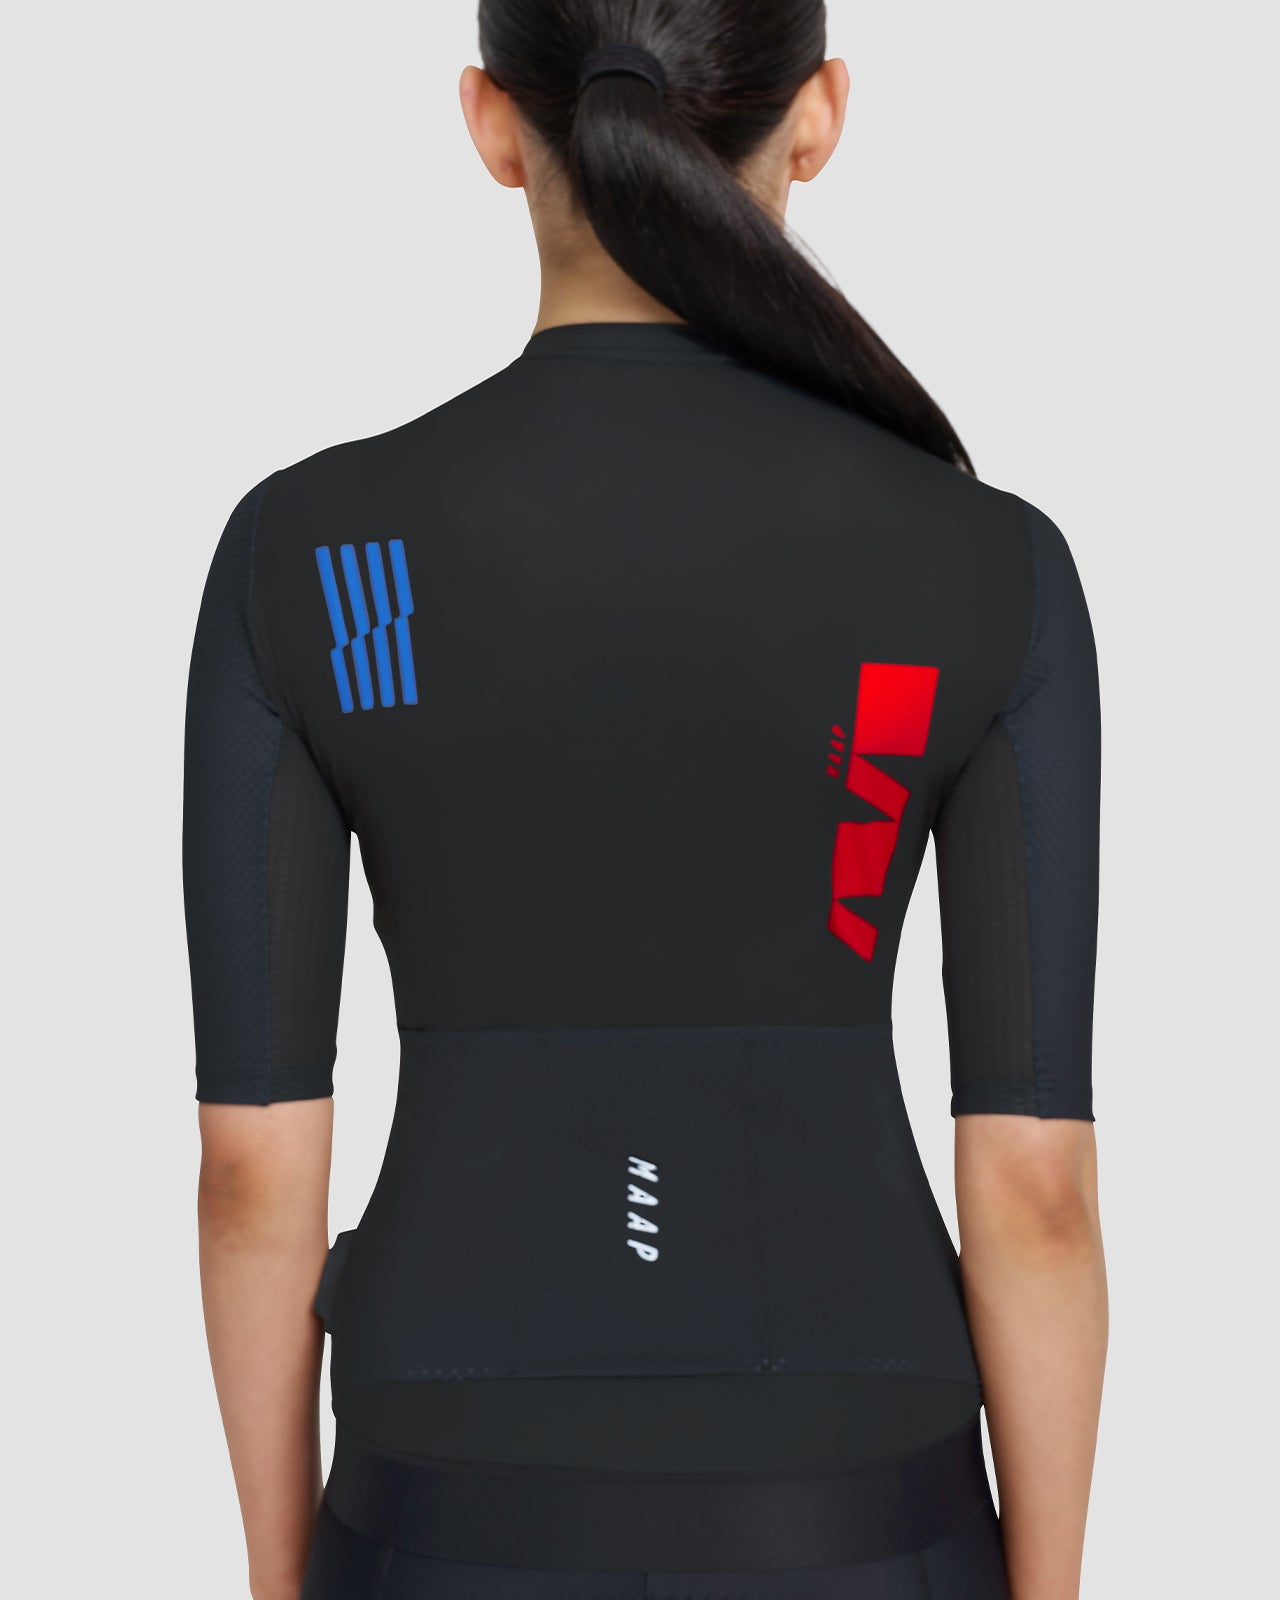 Women's Rival Pro Air Jersey